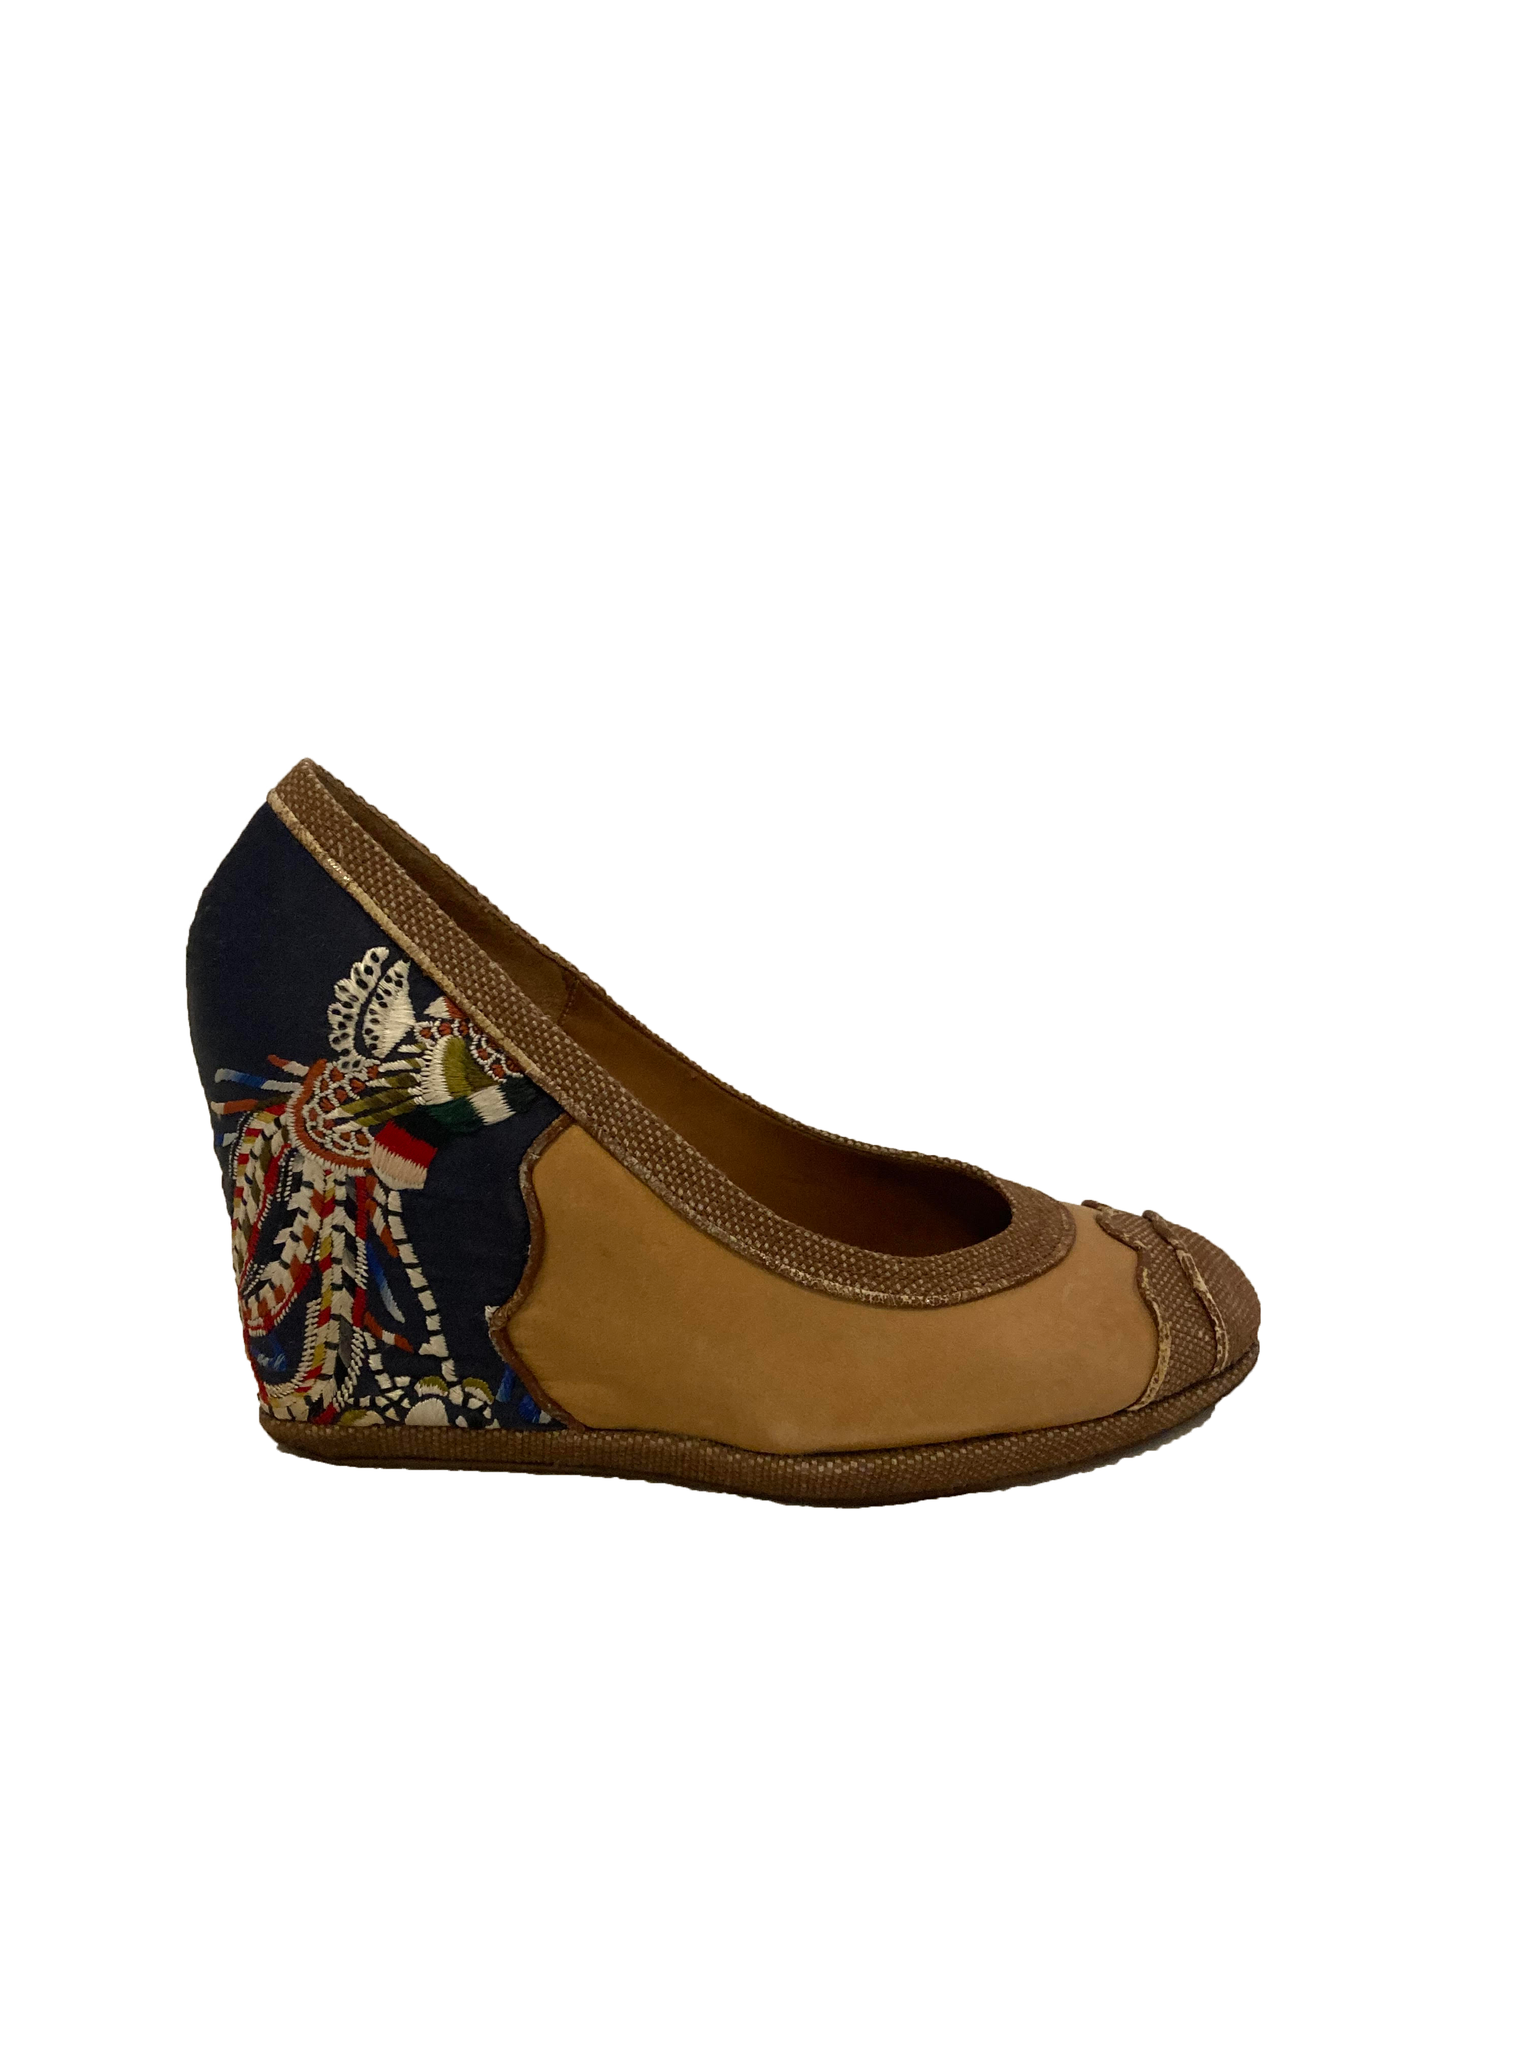 Embroidered Leather and Silk Wedges